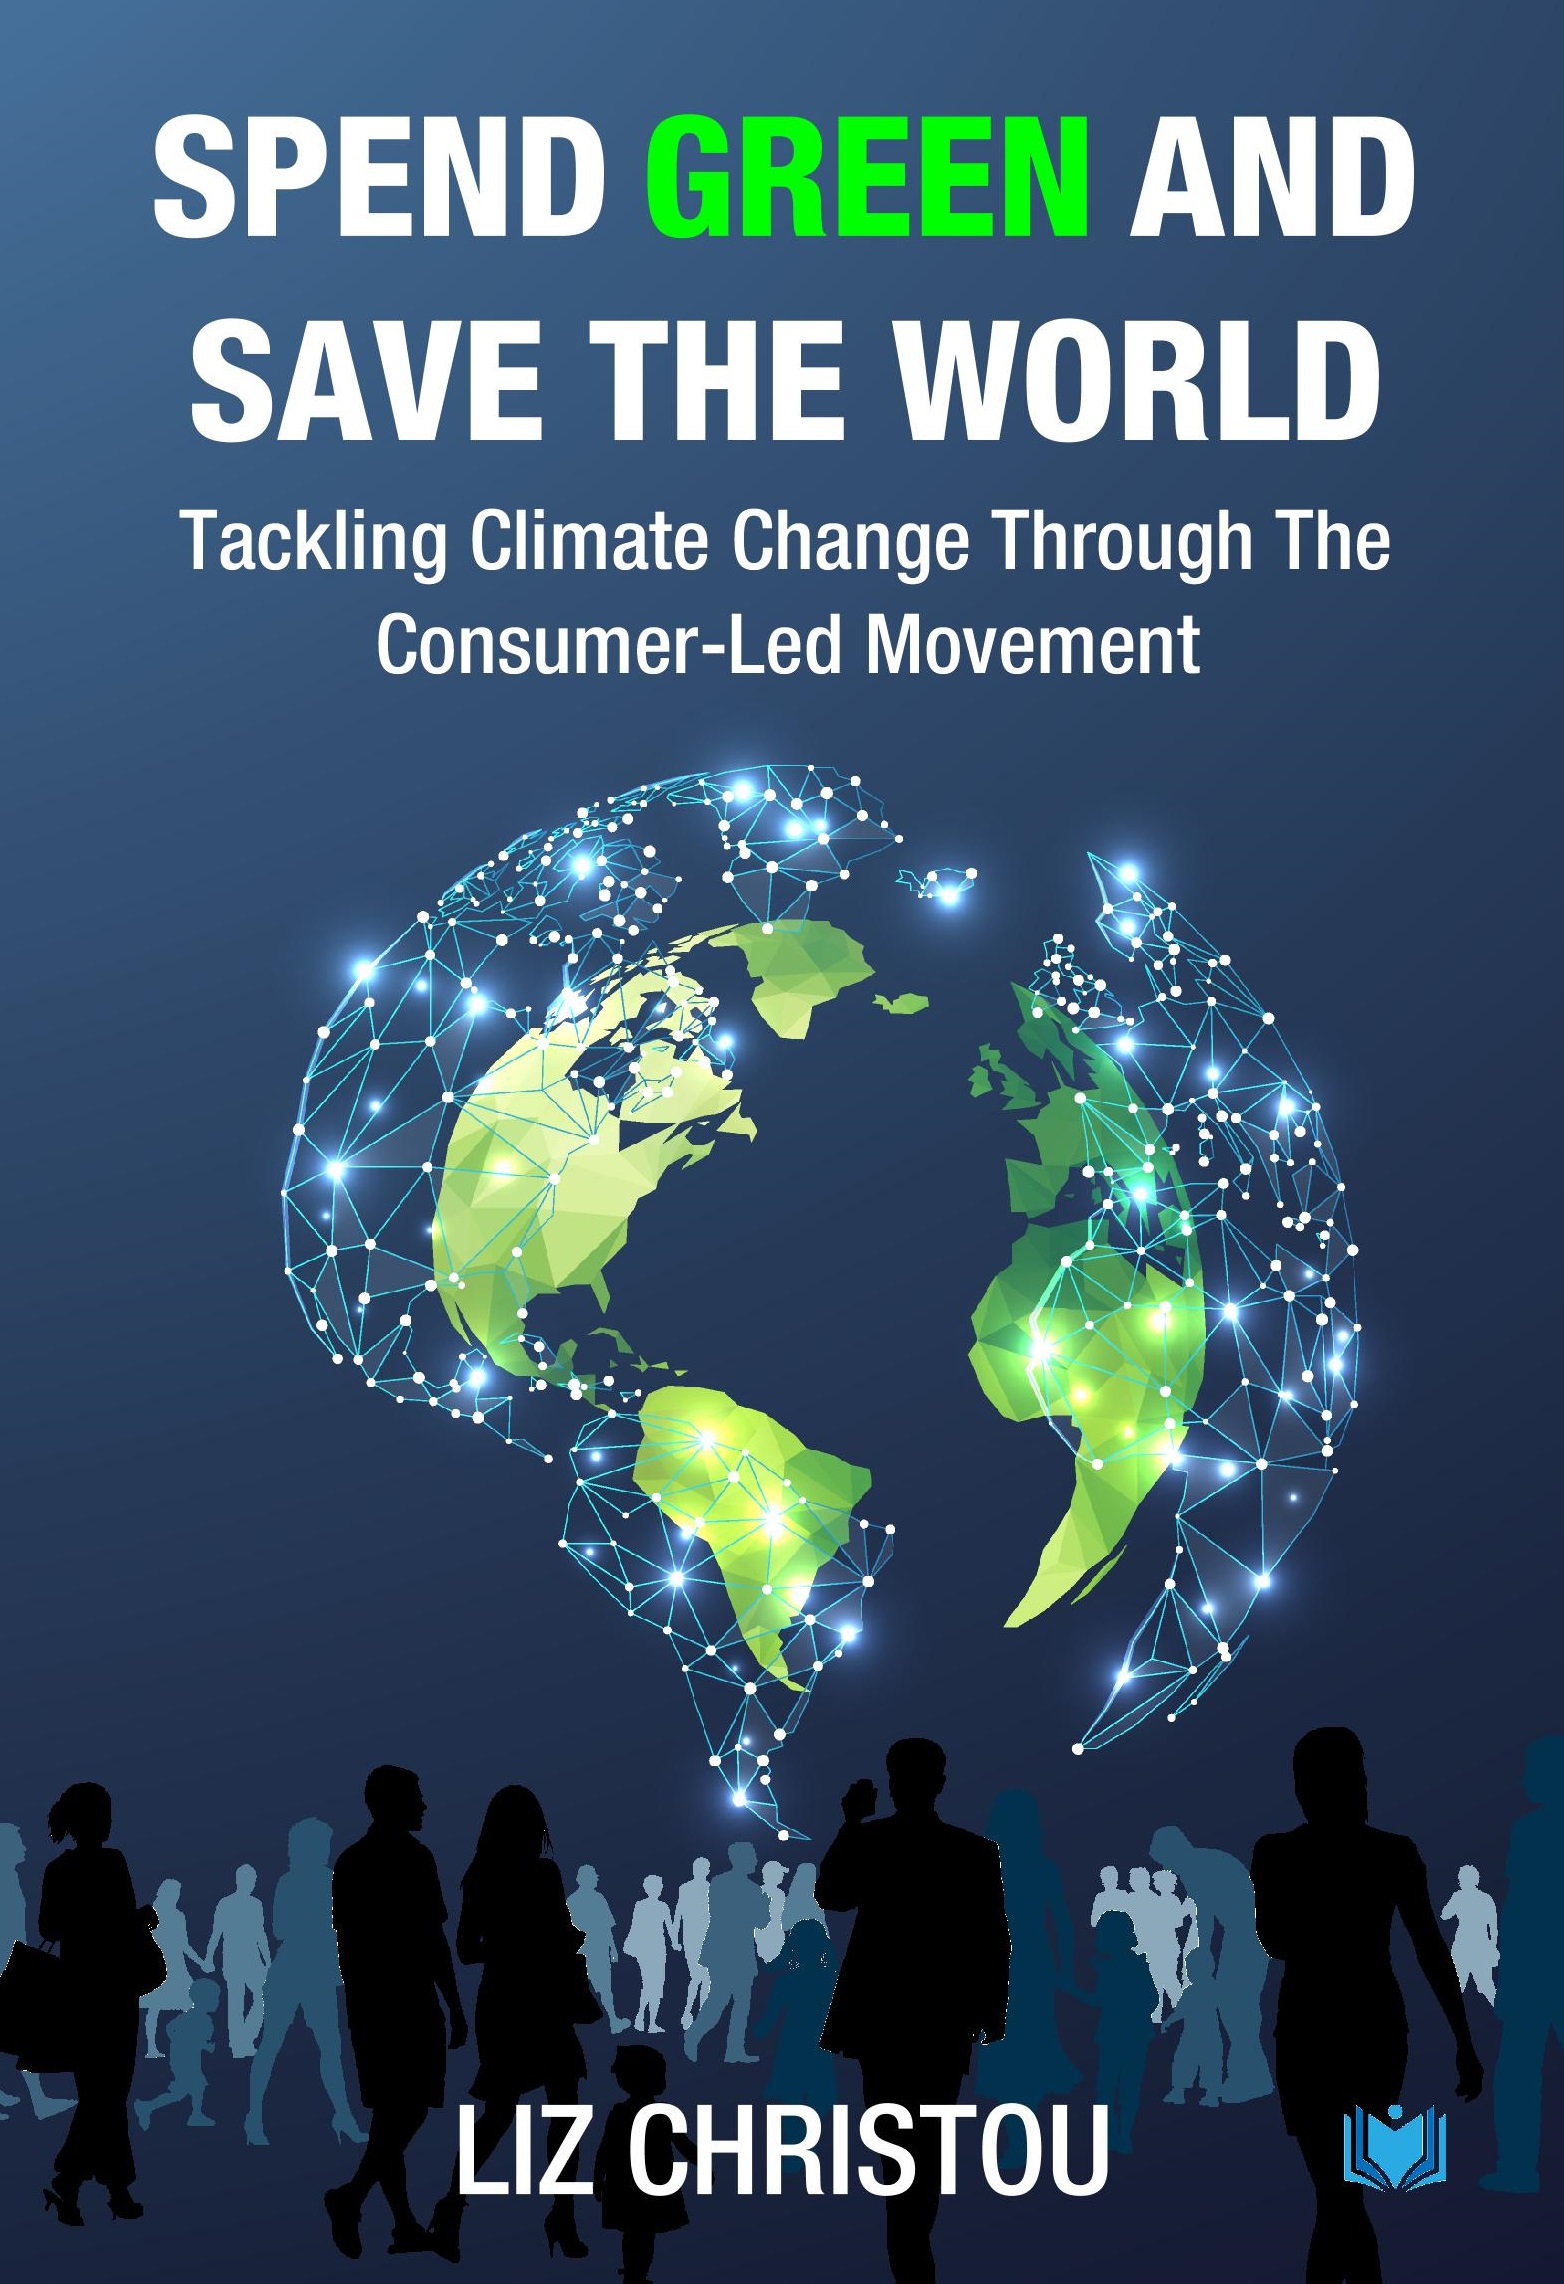 “Spend Green and Save The World” – New Book on Green Living to Help Combat Climate Change